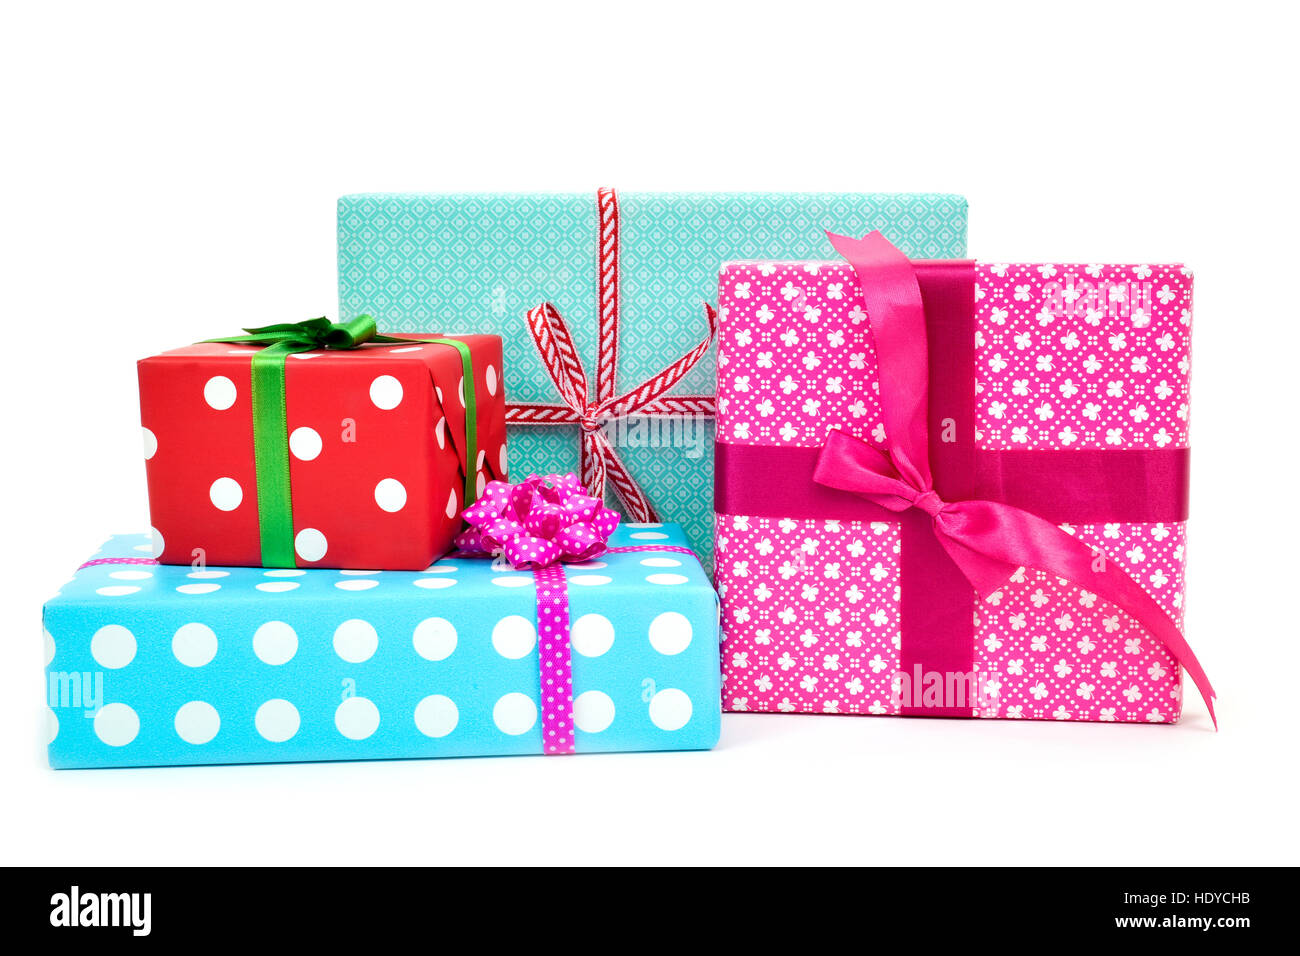 closeup of a pile of gifts wrapped in nice papers and tied with ribbons of different colors on a white background Stock Photo